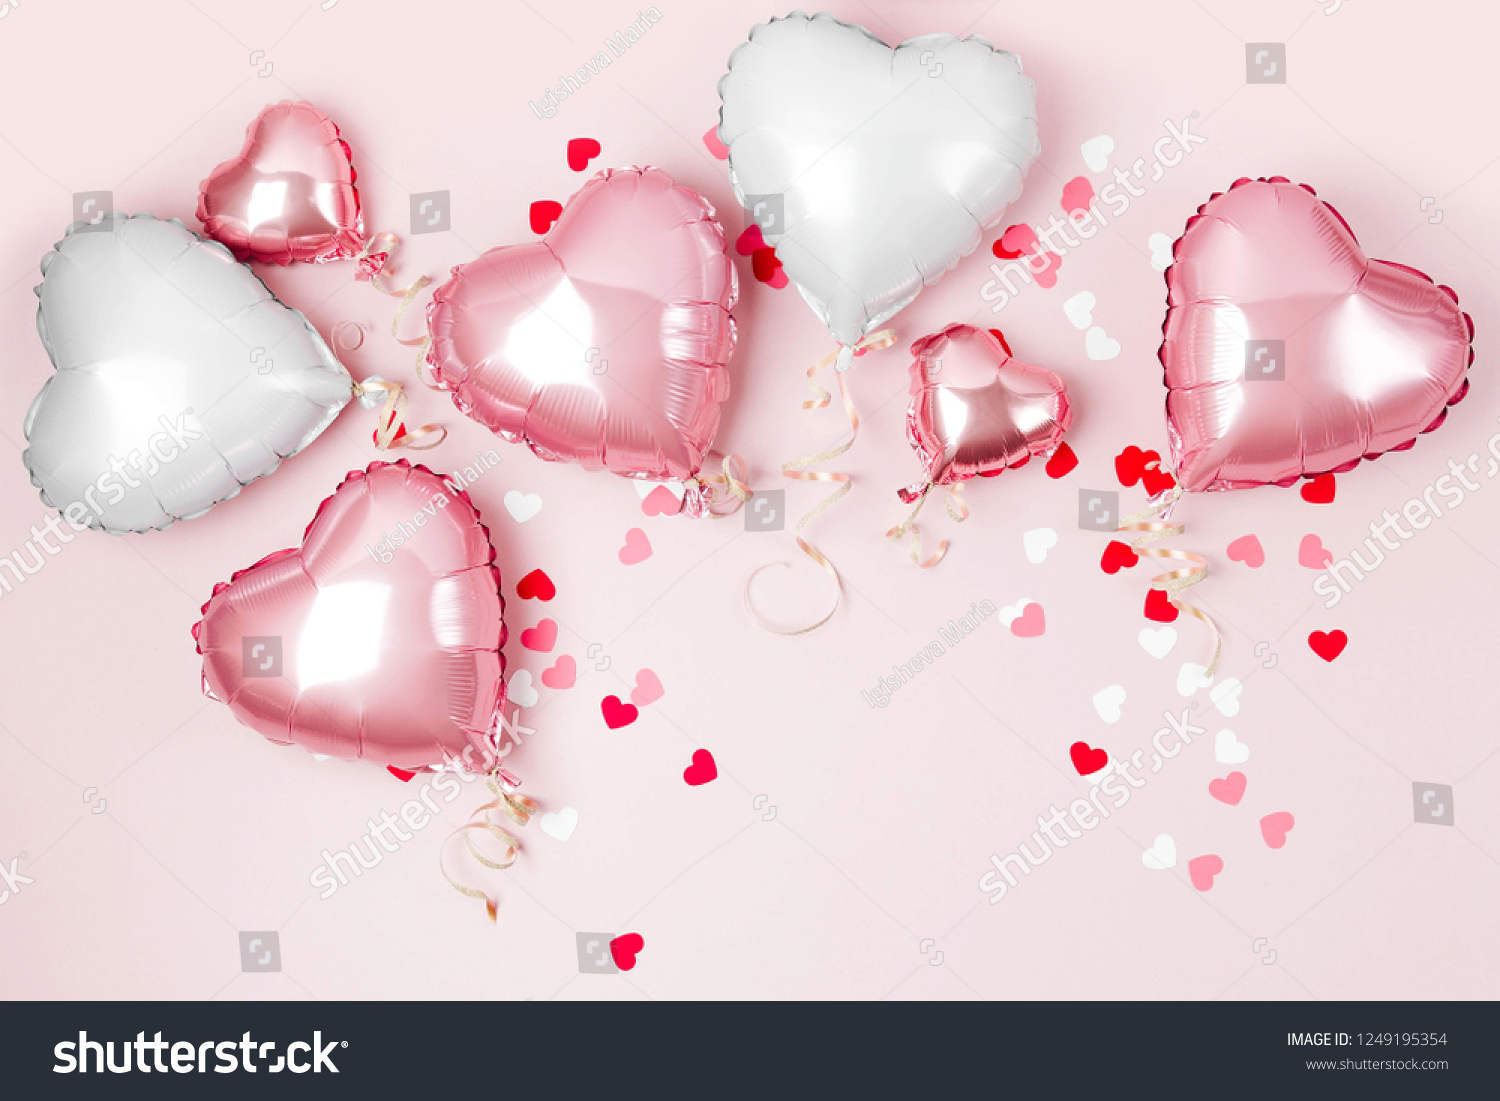 Air Balloons of heart shaped foil  on pastel pink background. Love concept. Holiday celebration. Valentine's Day or wedding/bachelorette party decoration. Metallic balloon #1249195354